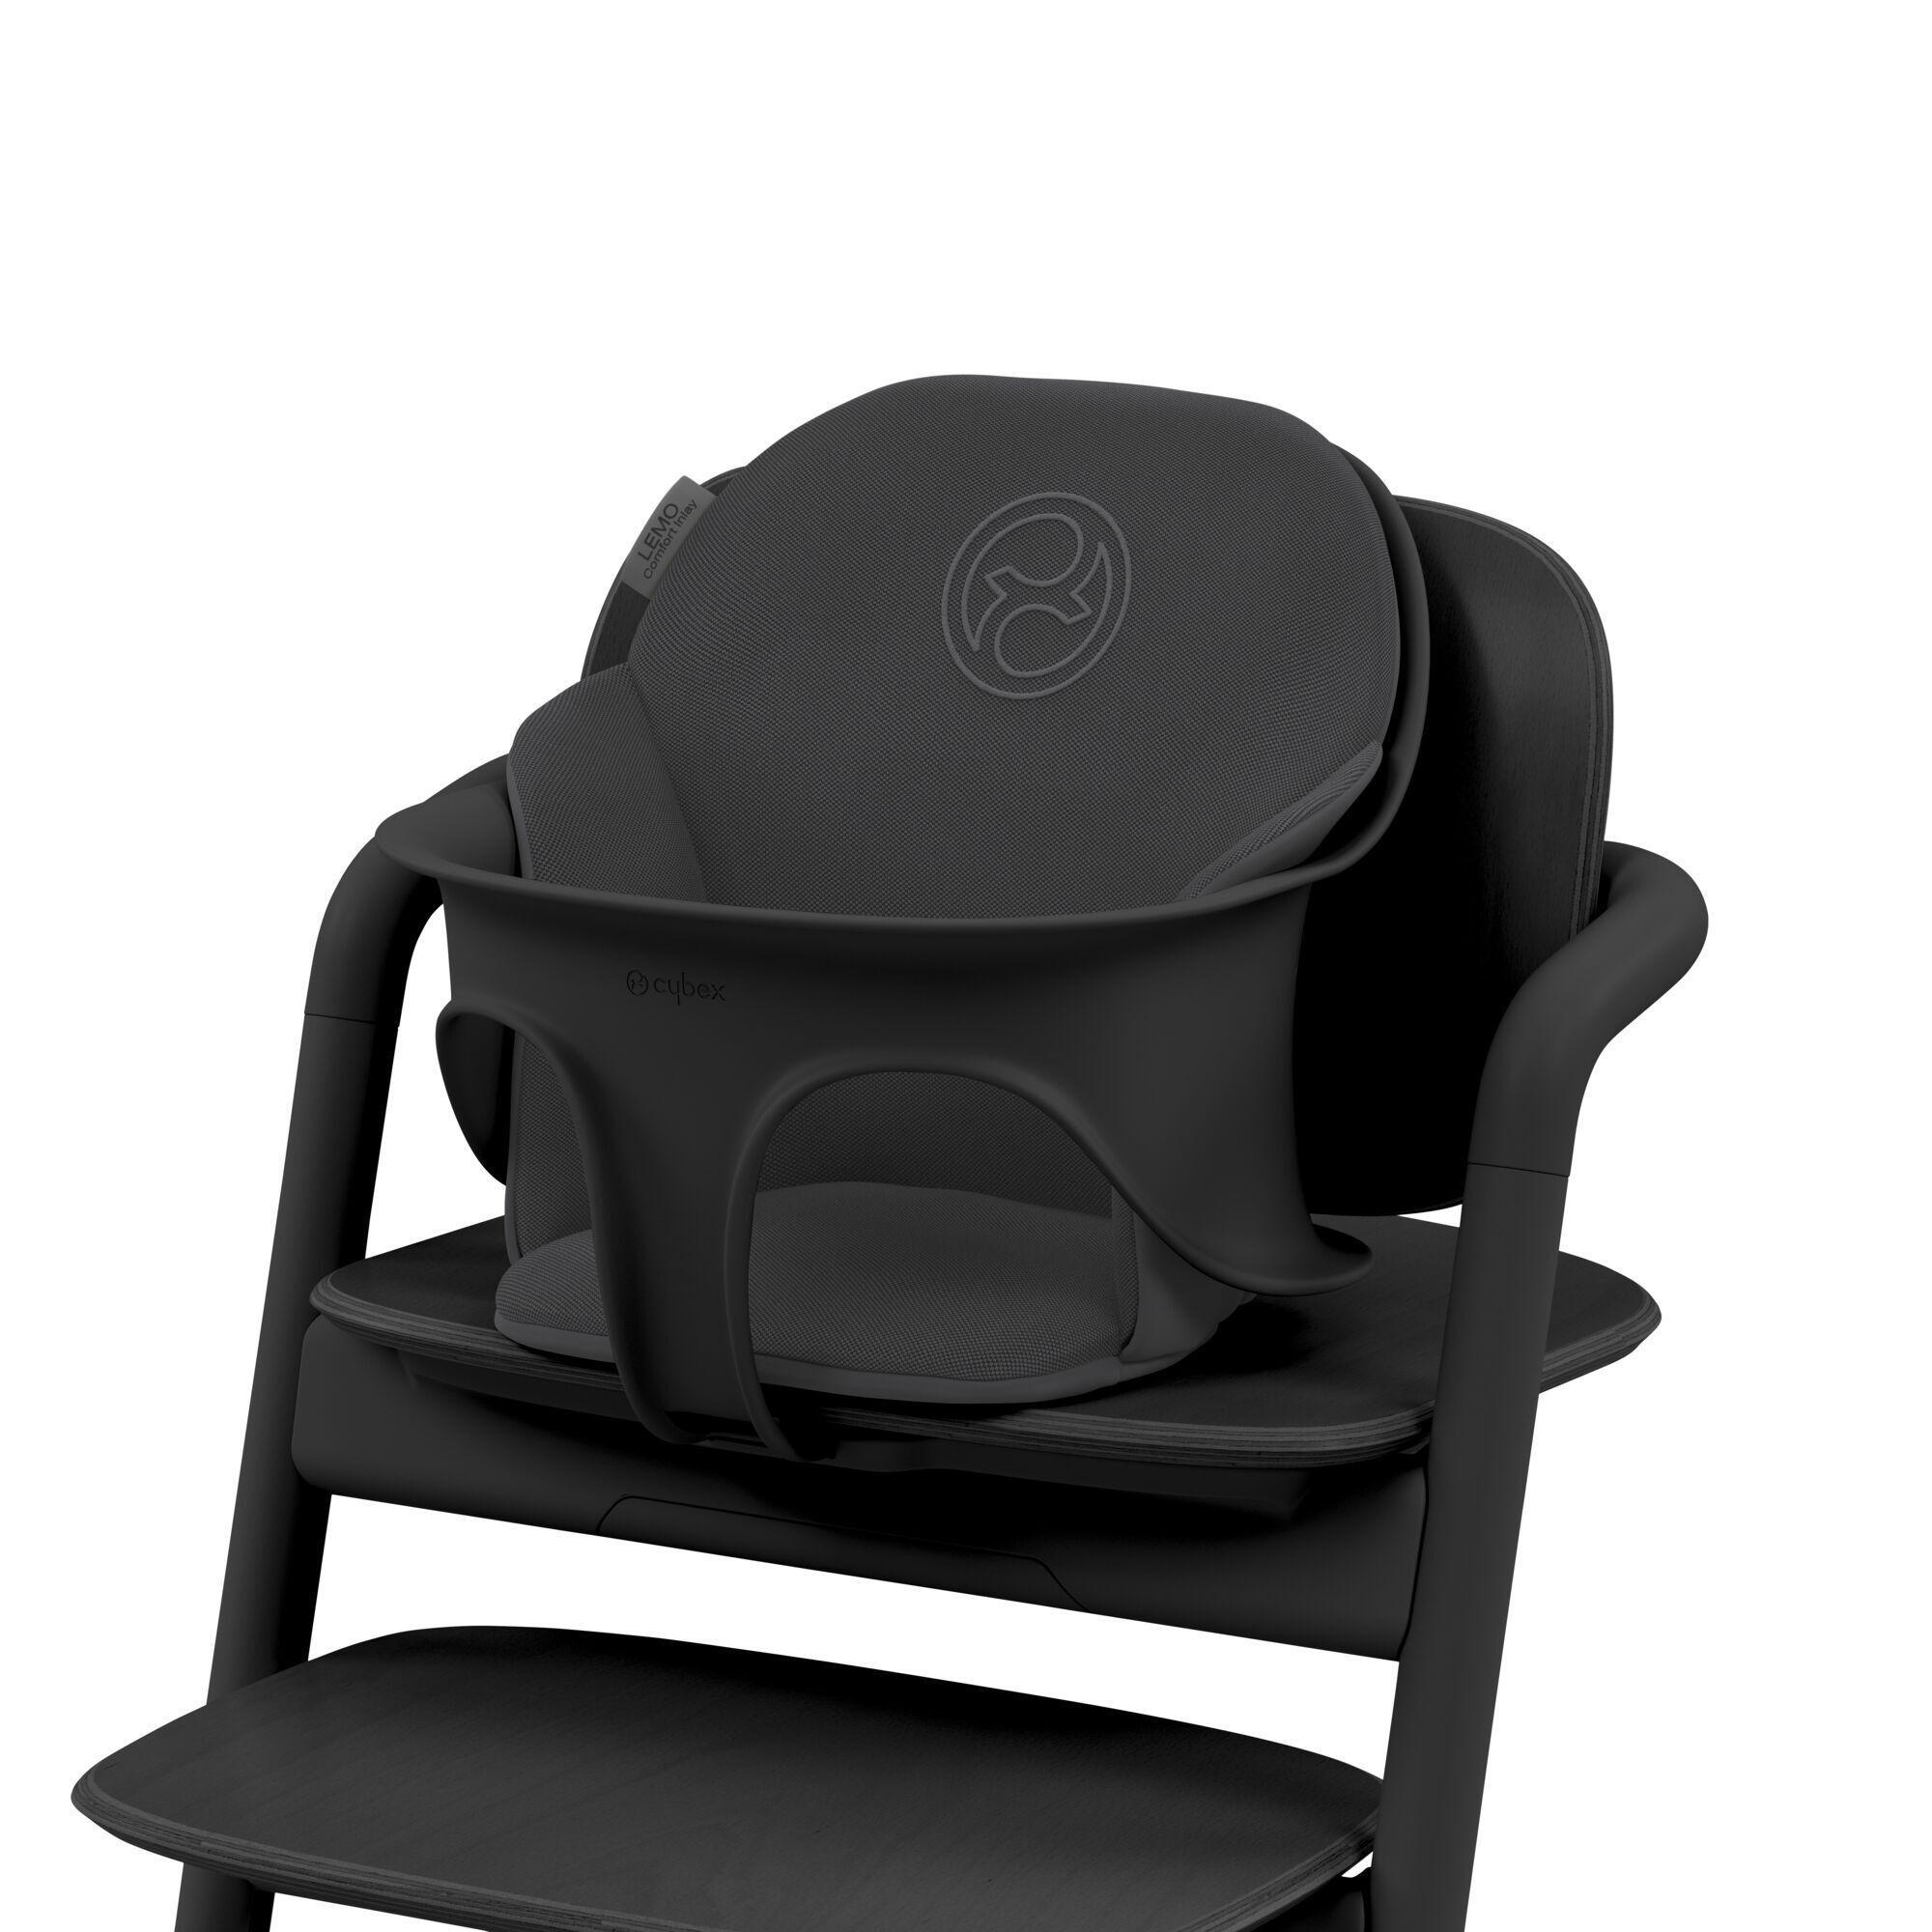 CYBEX LEMO Chair  The CYBEX LEMO Chair offers a sustainable